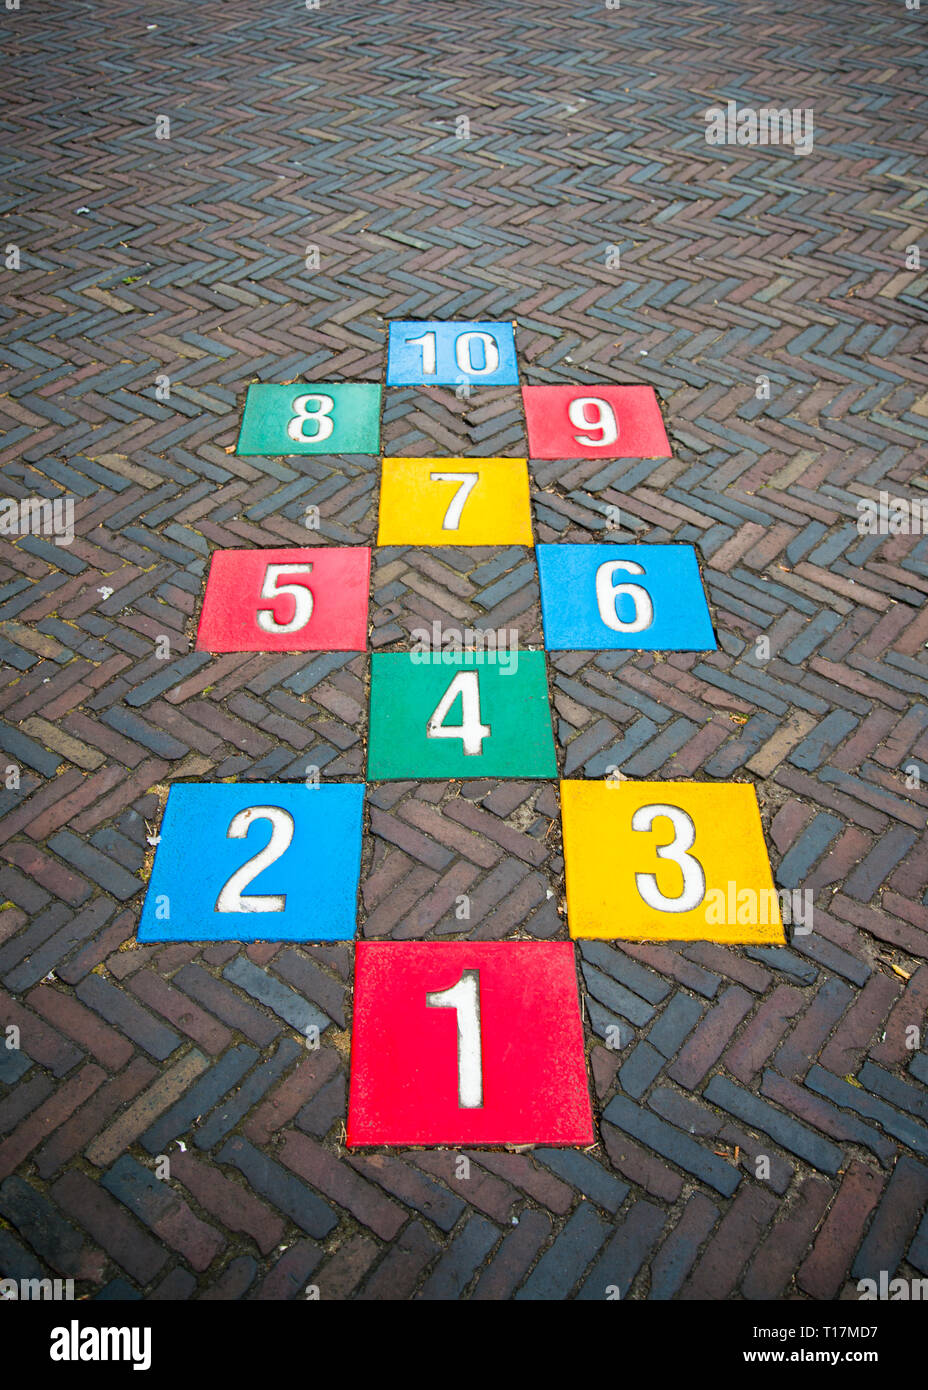 hopscotch numbers painted on to paved street one to ten Stock Photo